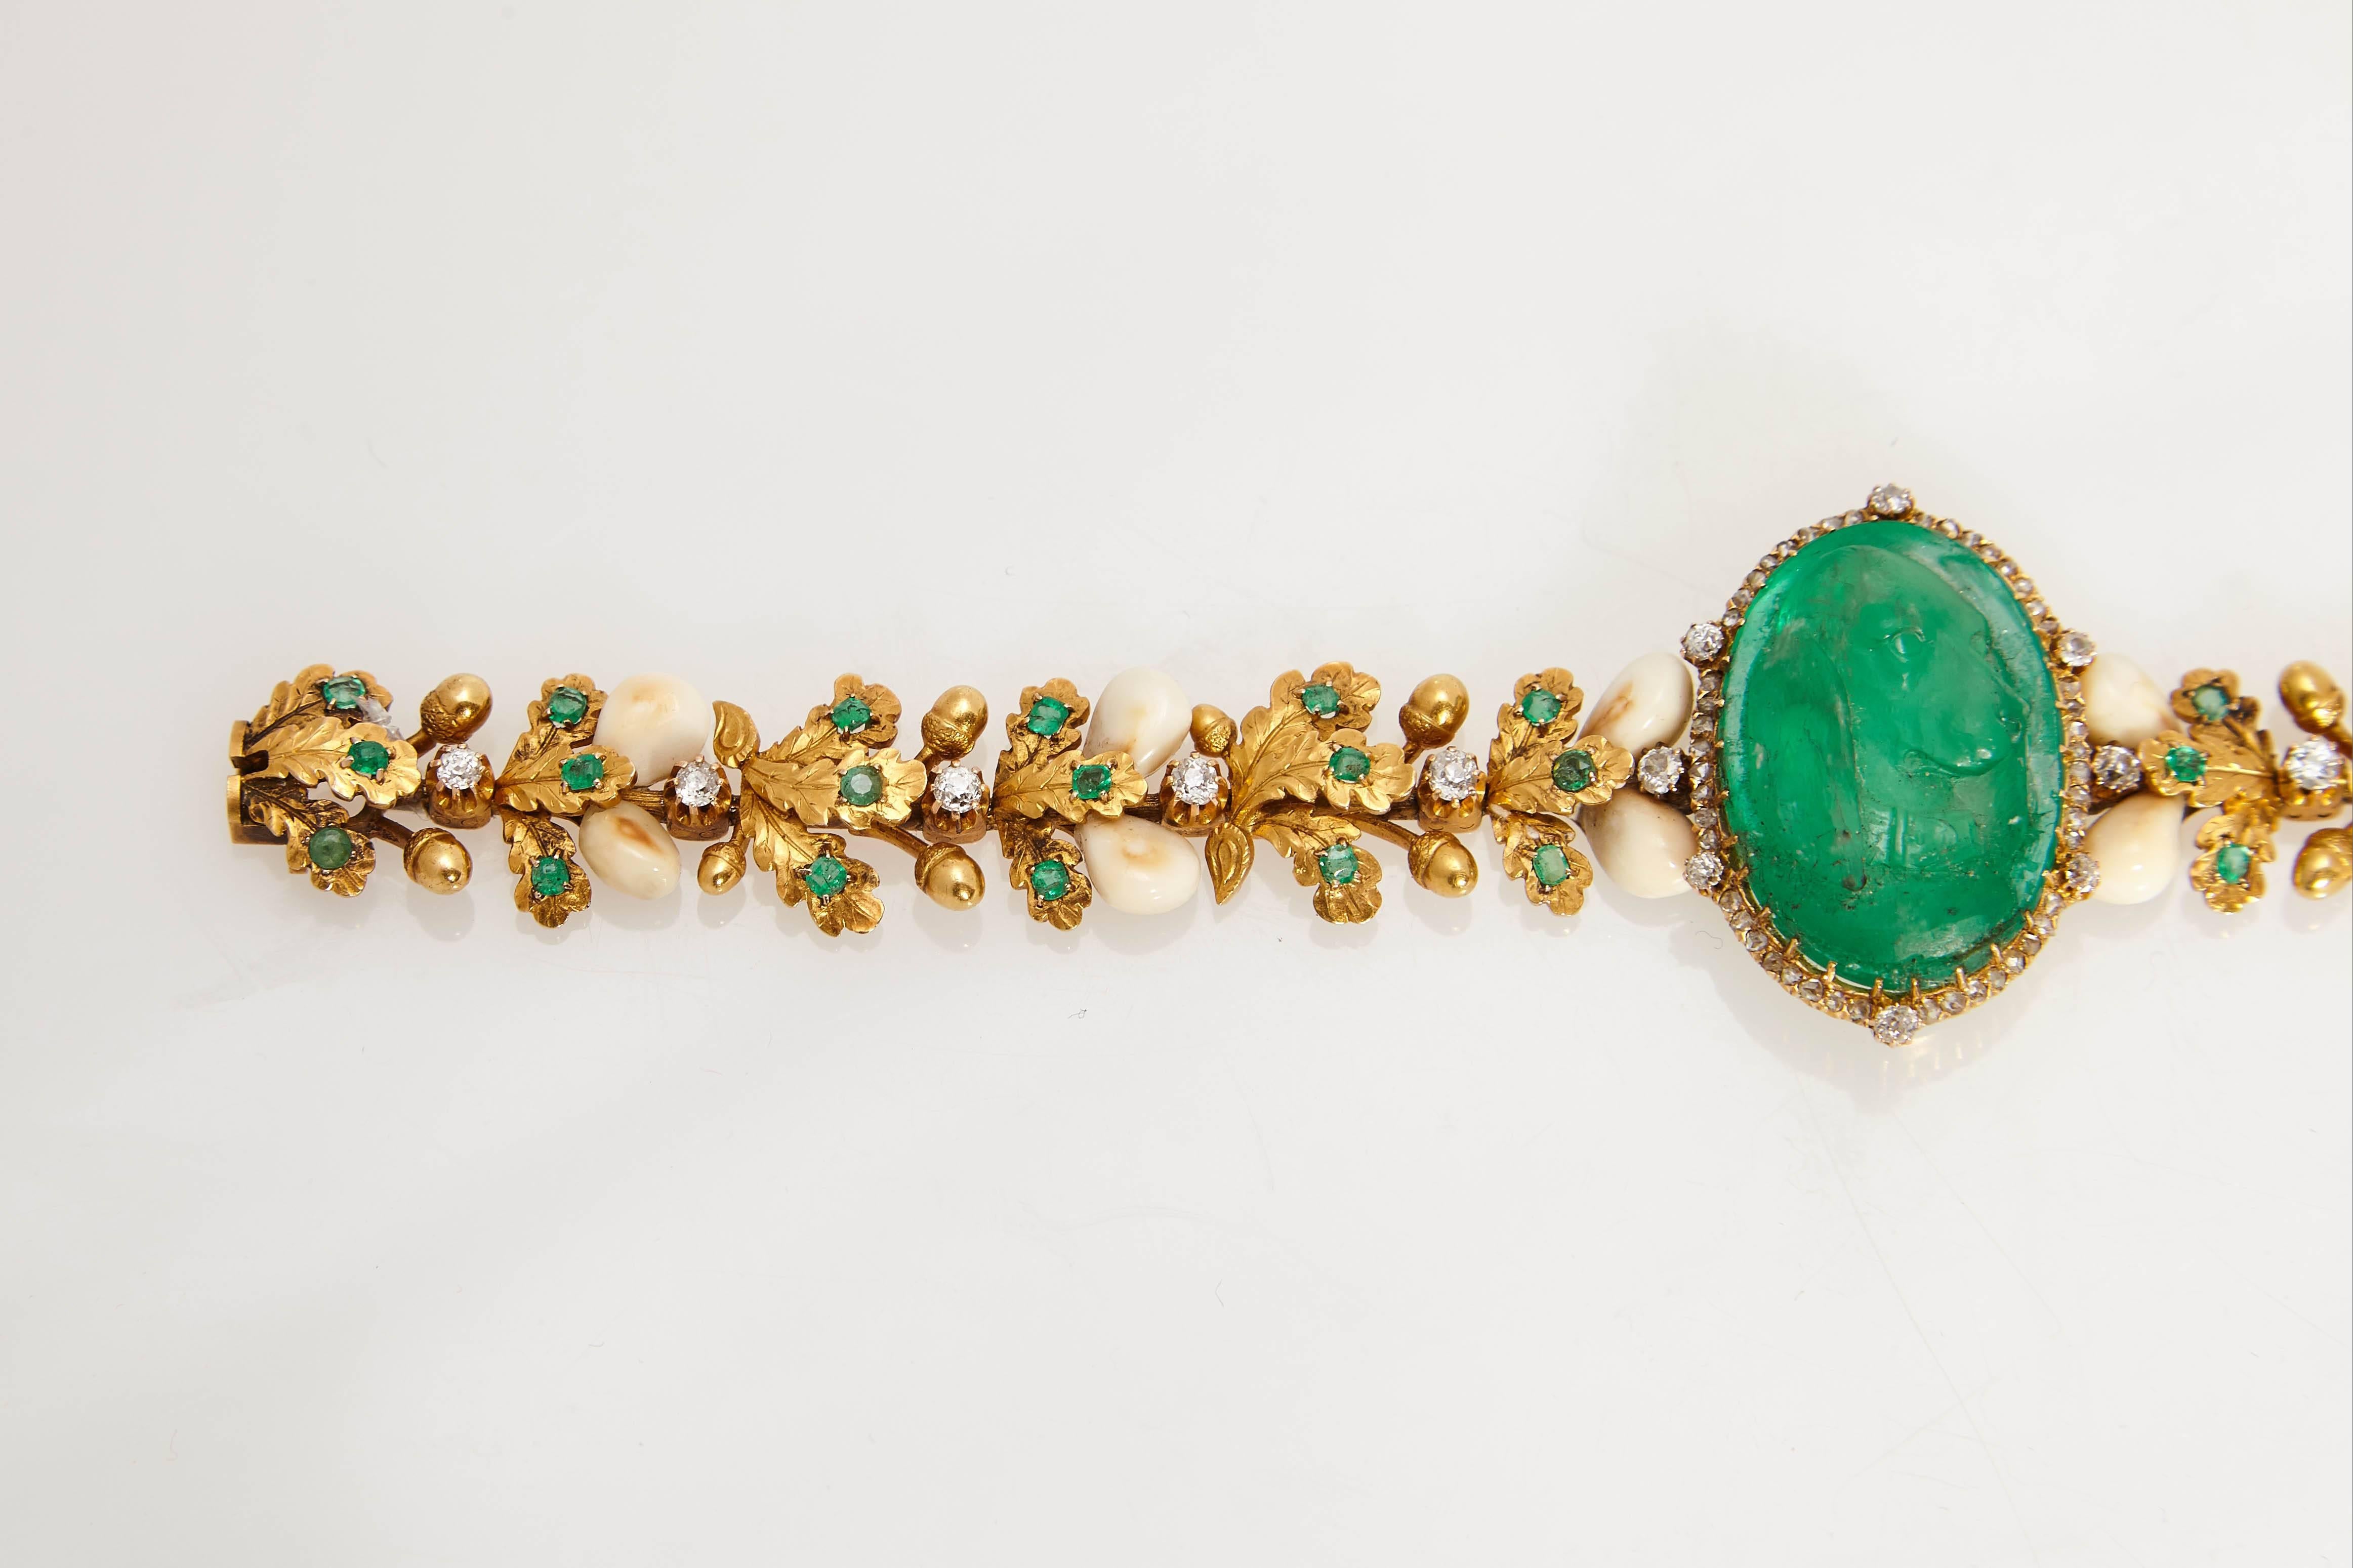 A very unusual bracelet in celebration of hunting, centering an emerald cameo representing a dog, the body of the bracelet composed of gold leaves and wild boar teeth, highlighted with diamonds and emeralds. Made in Italy, circa 1910.